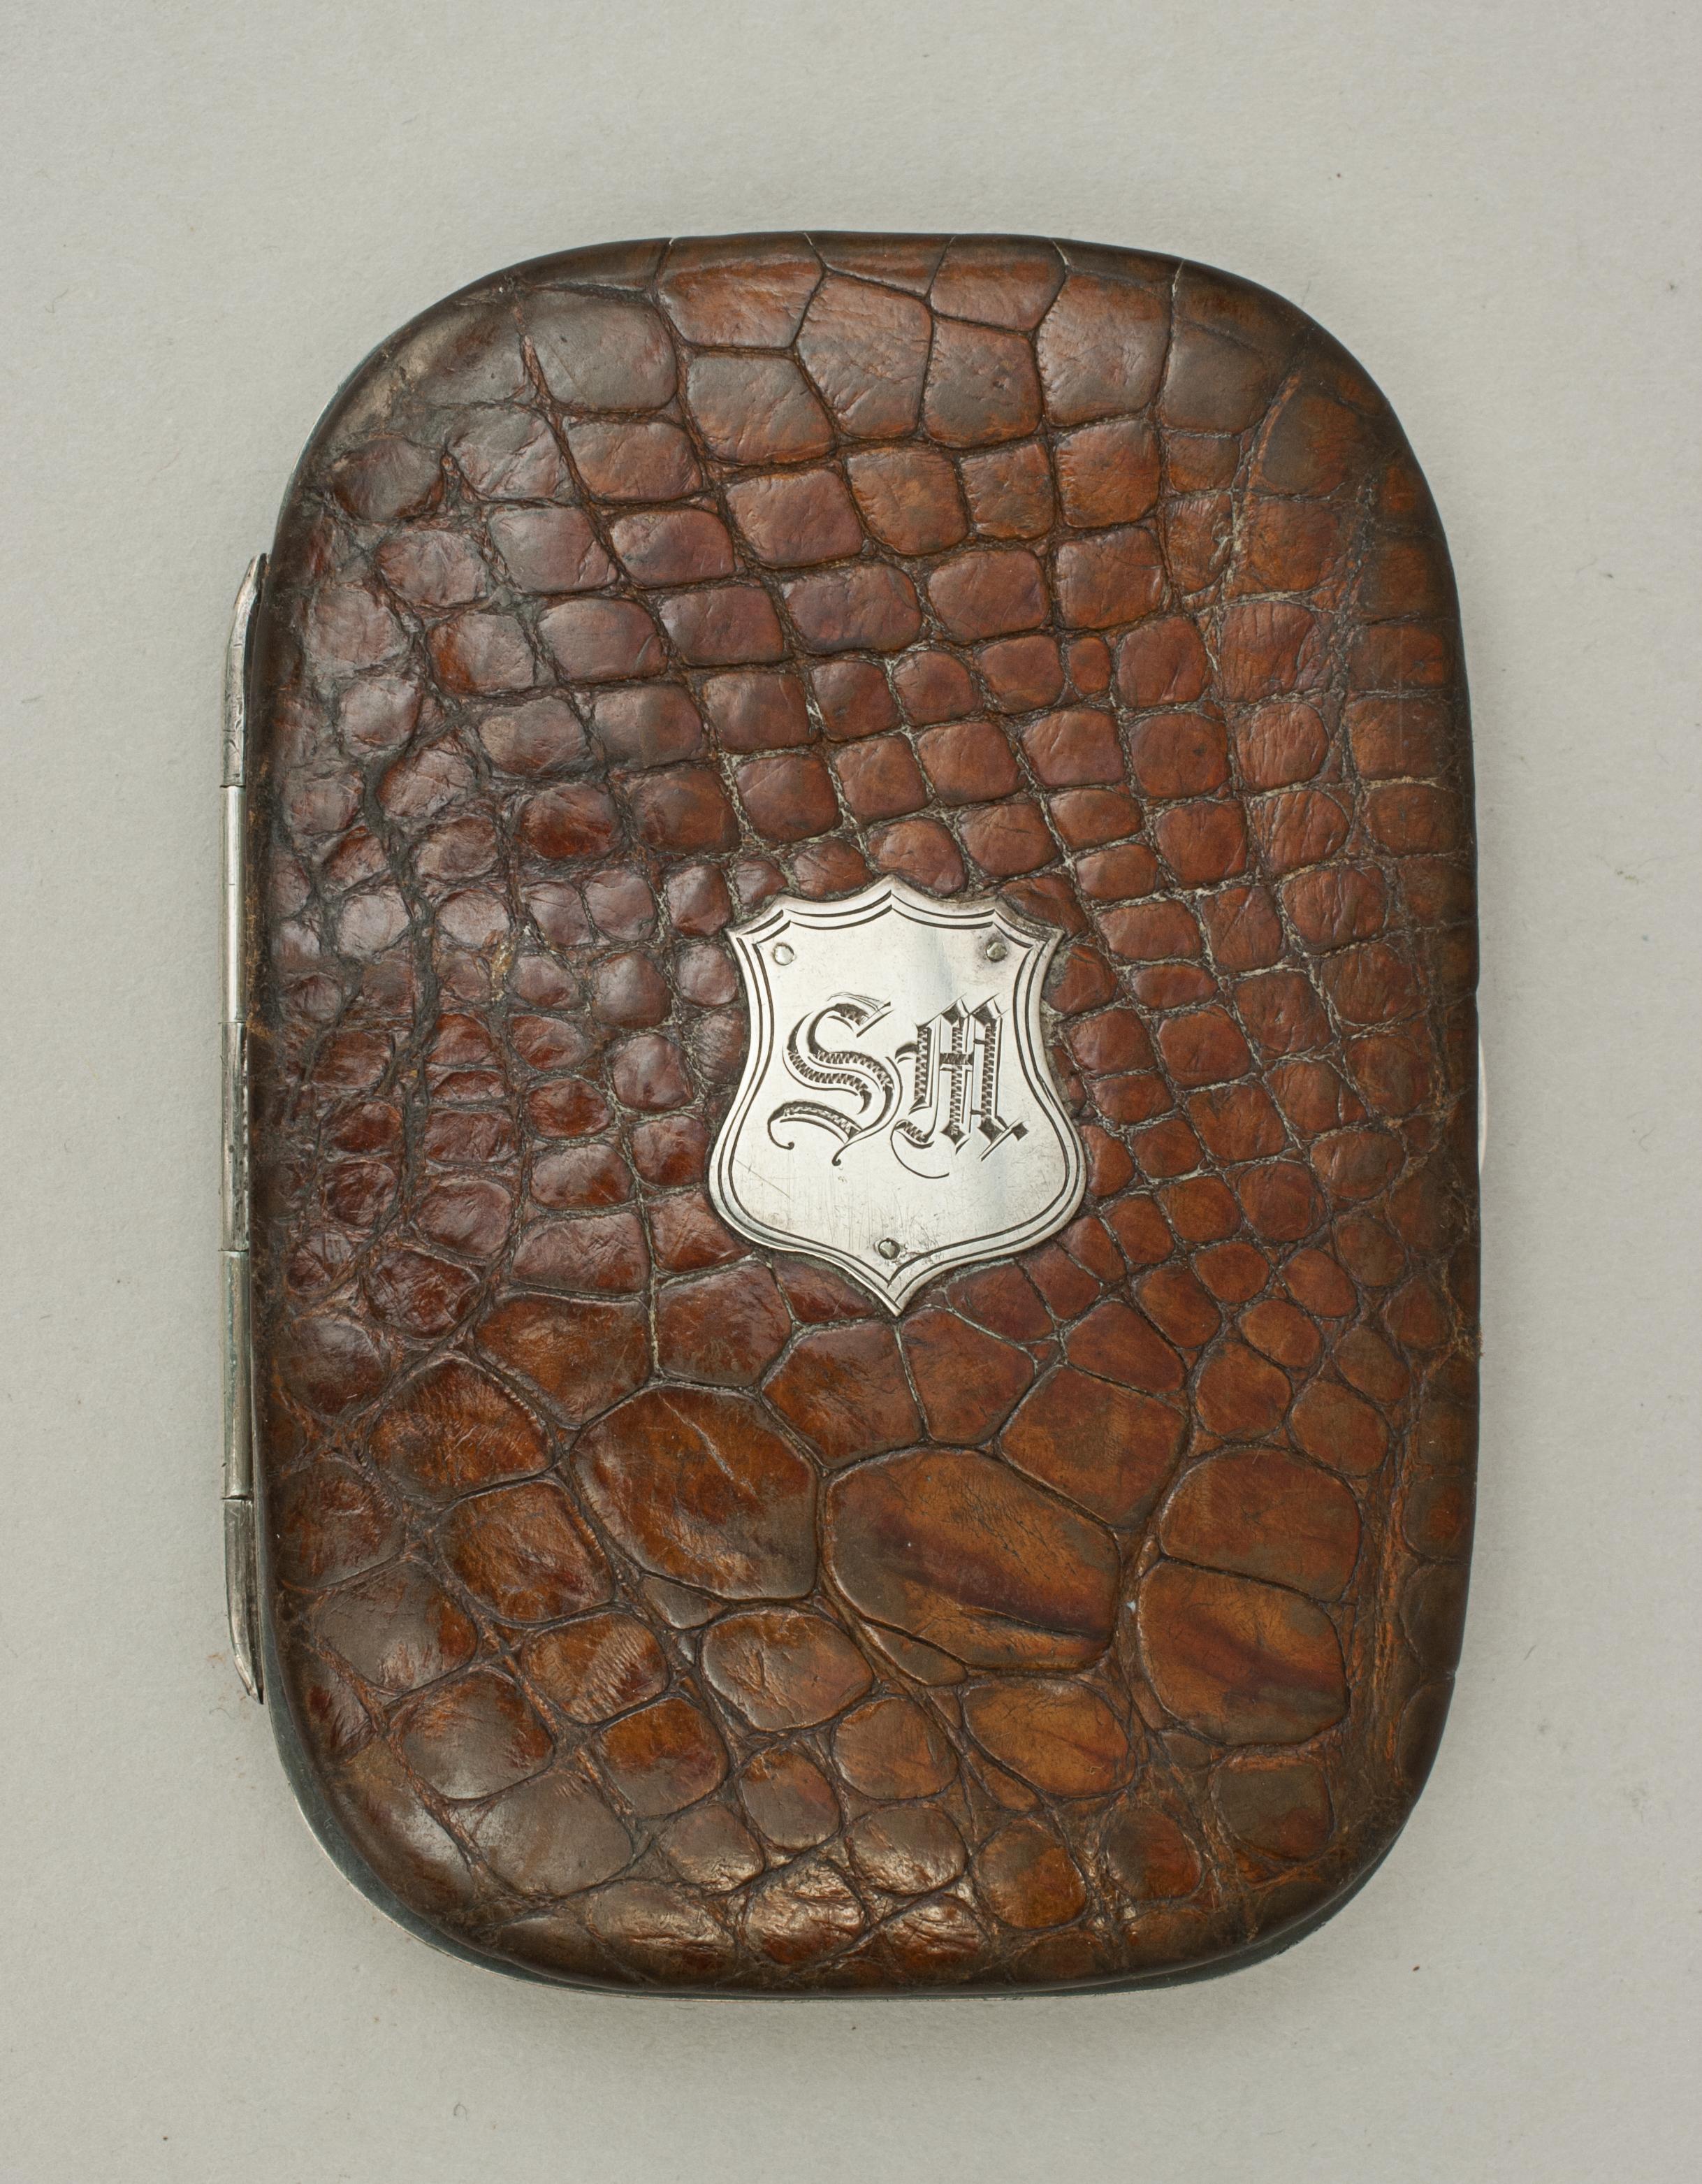 Leather crocodile calling card wallet, postage stamp case.
An unusual crocodile leather postage stamp or calling card case with silvered frame and central catch. The front with silvered shield with the initials 'SM'. Interior very nice with leather